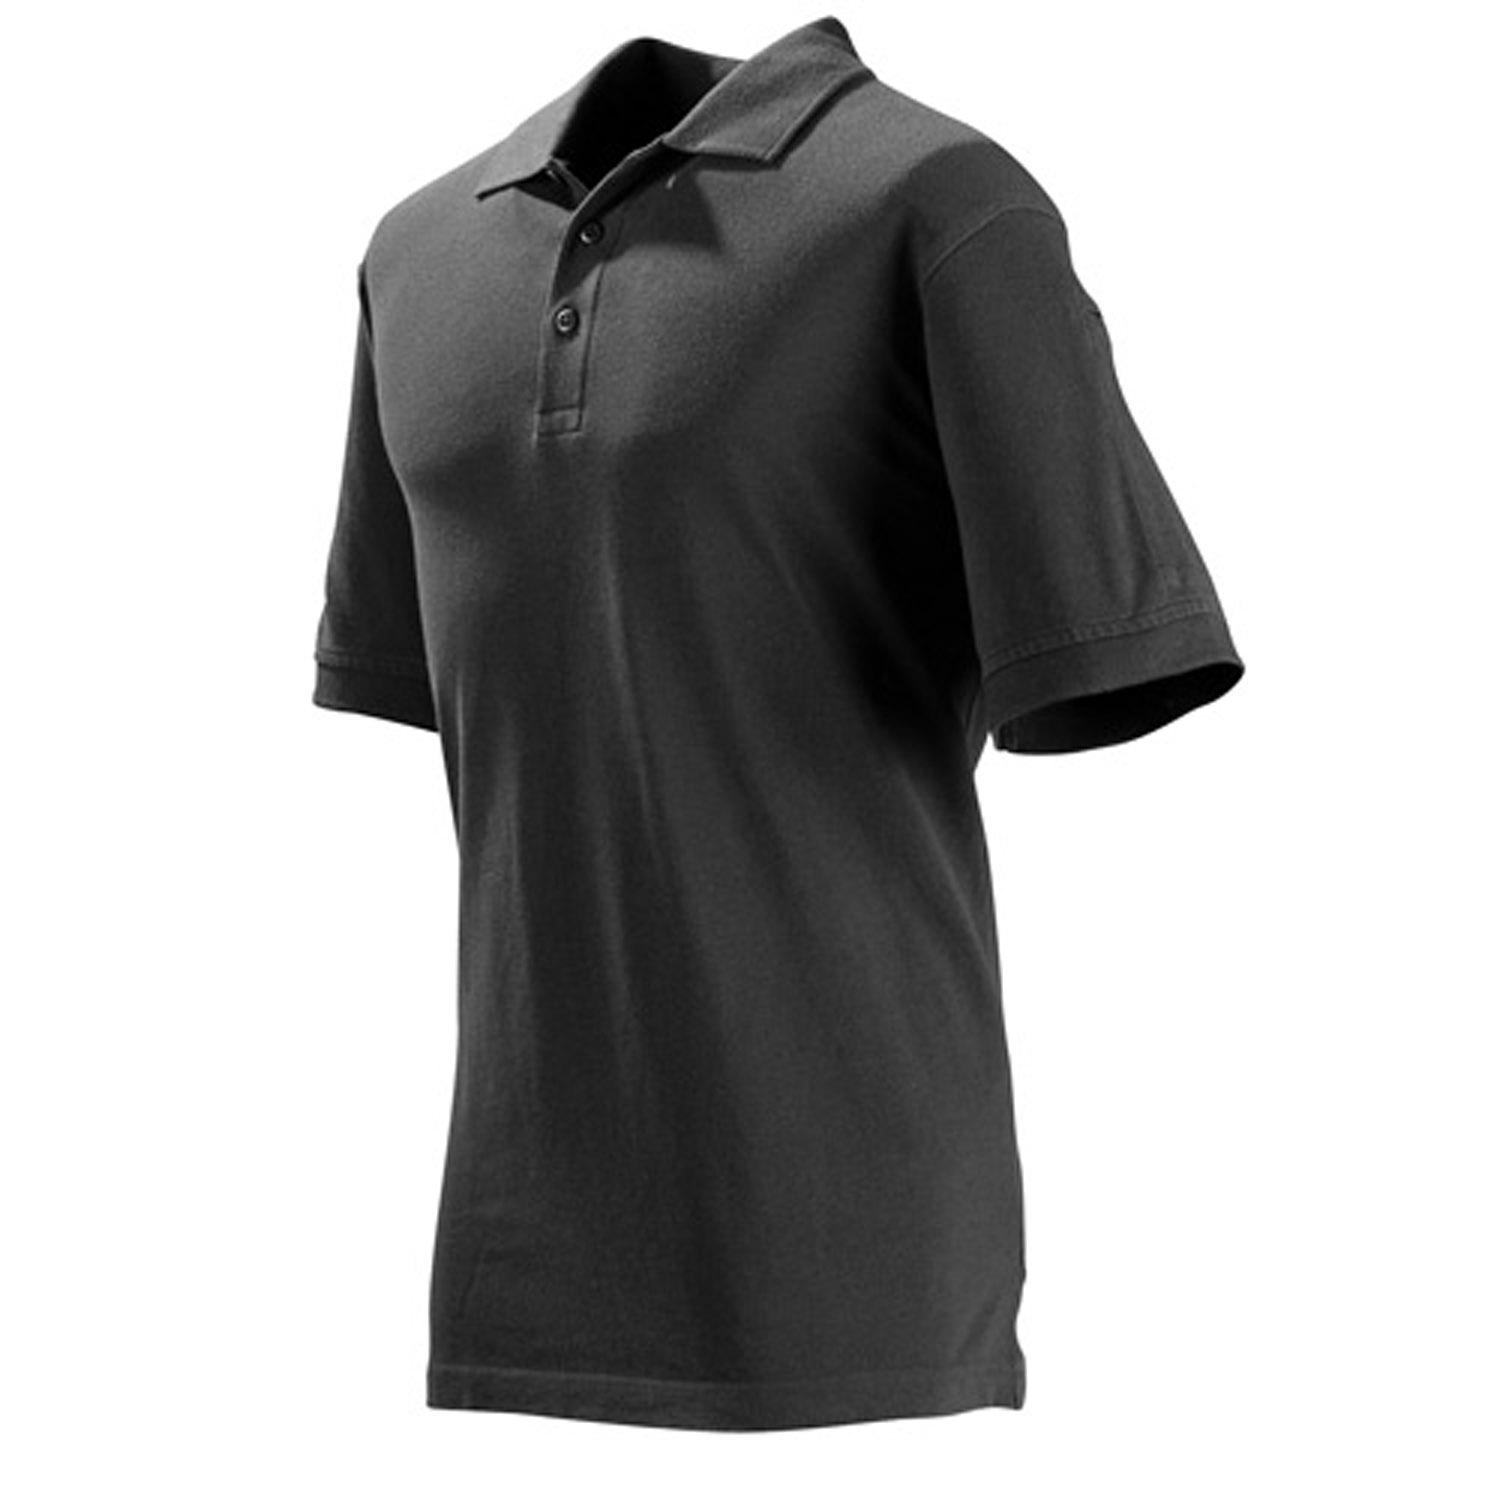 5.11 TACTICAL PROFESSIONAL SHORT SLEEVE POLO